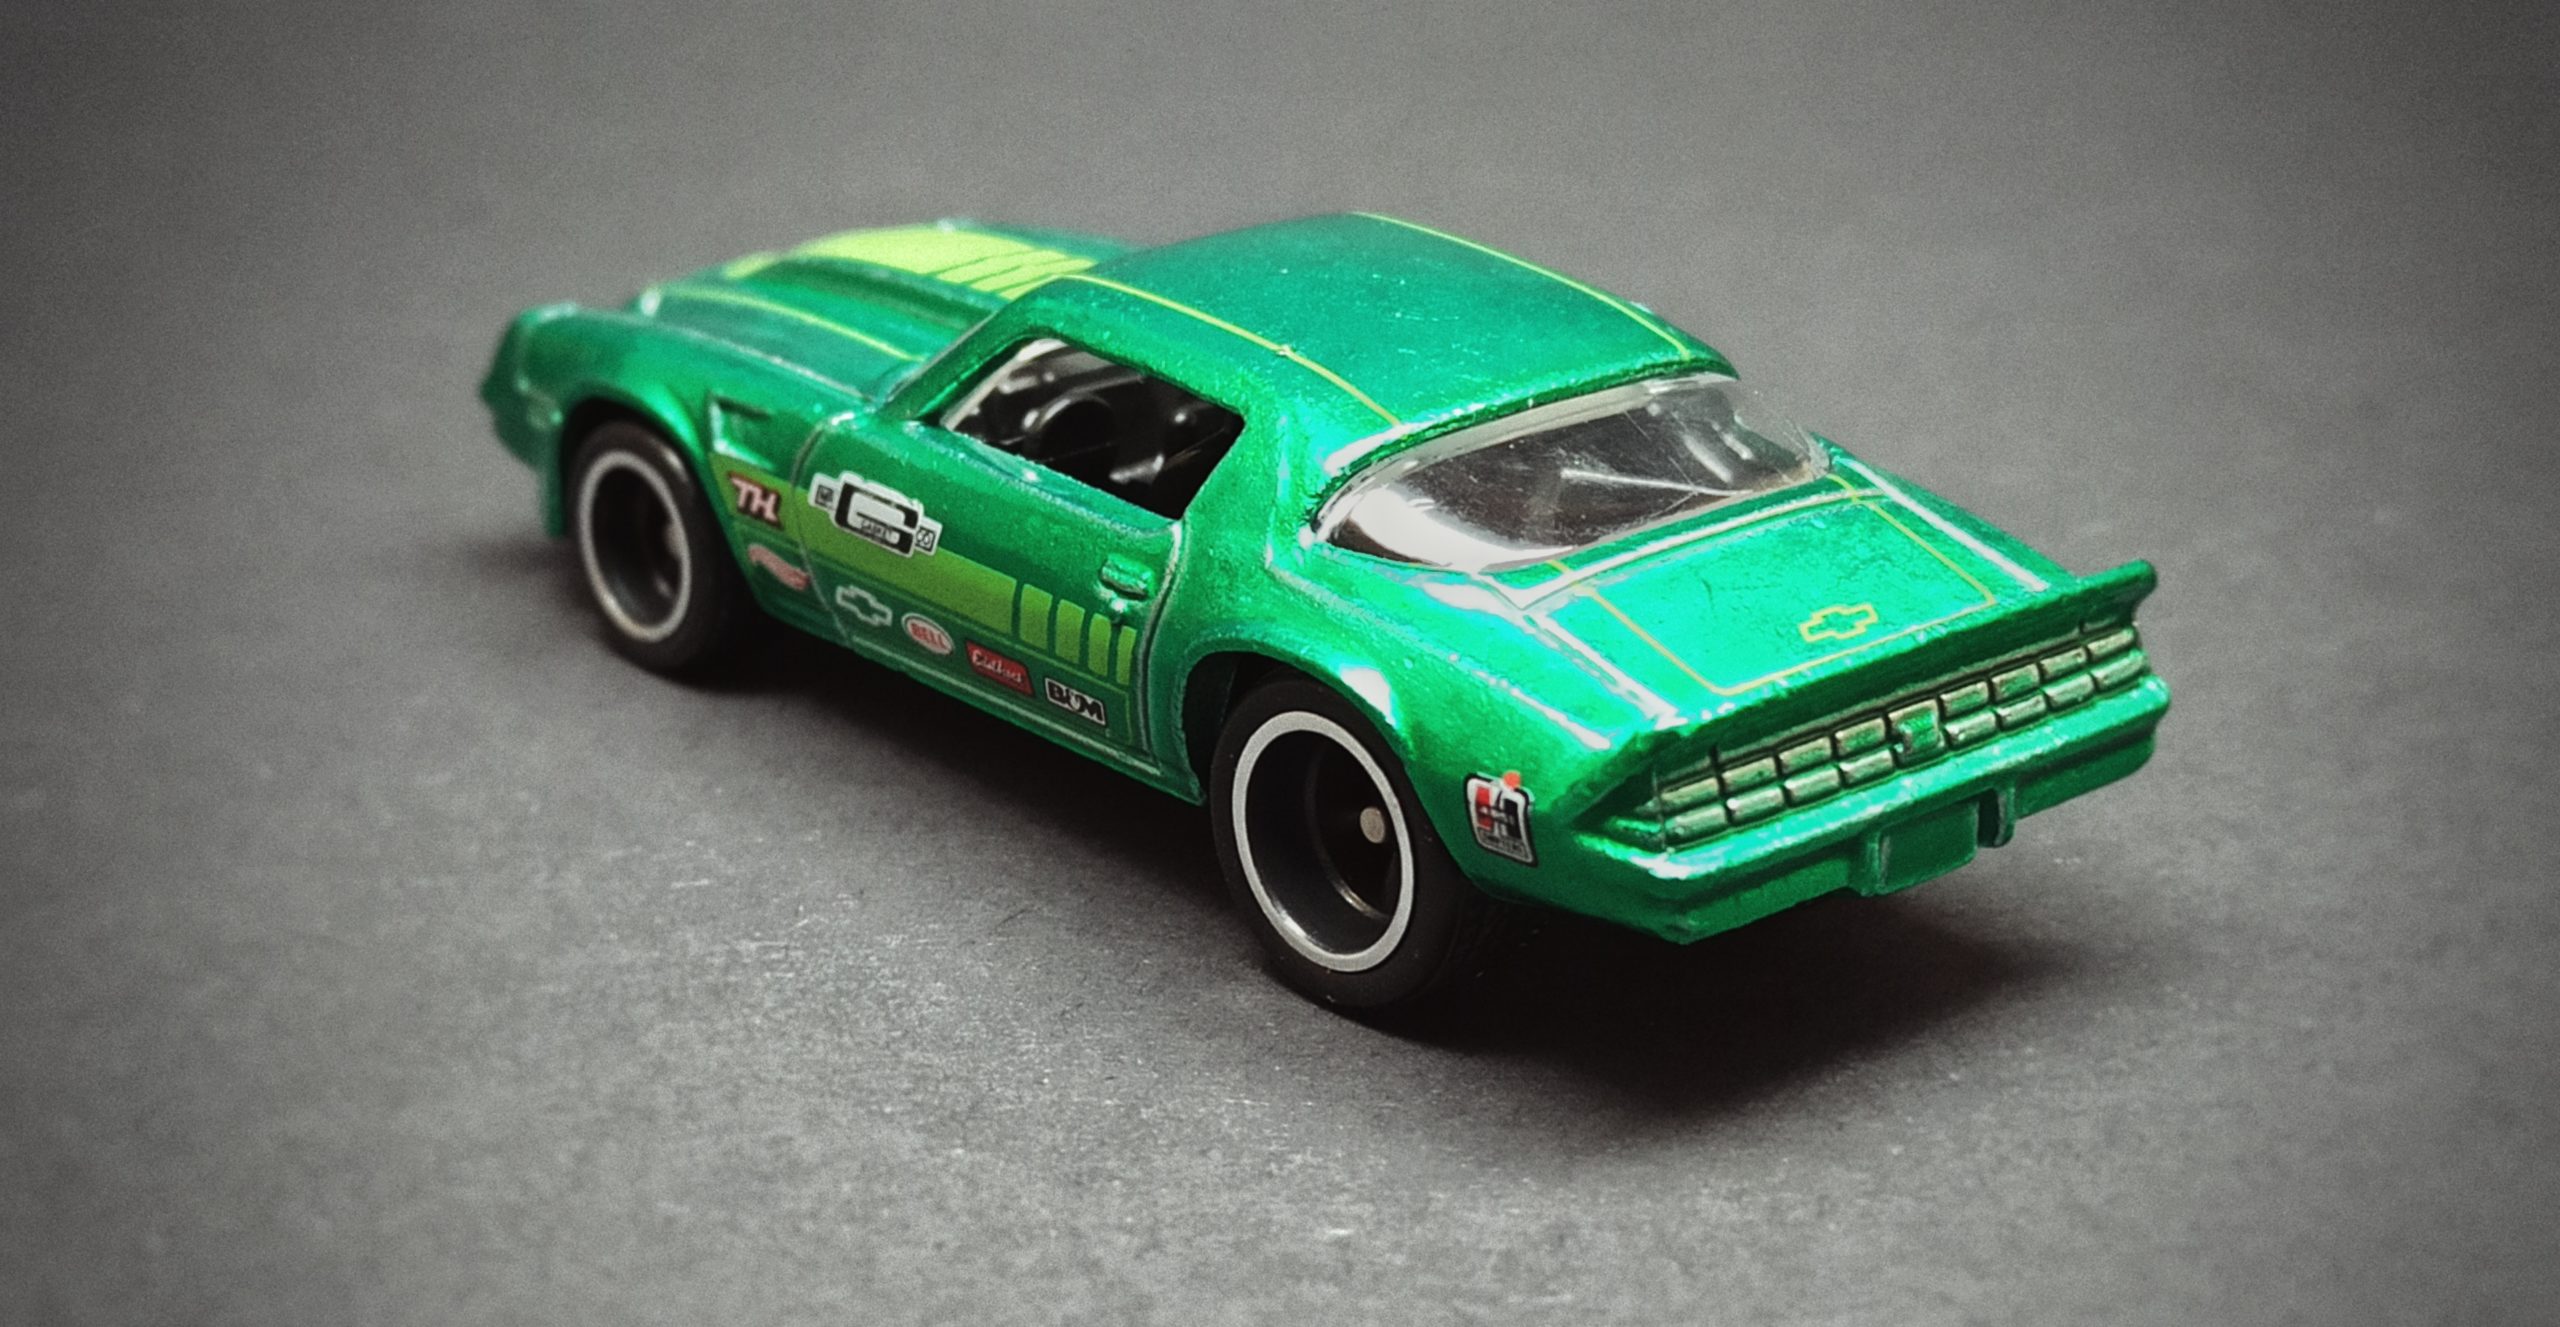 Hot Wheels '81 Camaro (HCY23) 2022 (248/250) Then and Now (10/10) spectraflame green Super Treasure Hunt (STH)